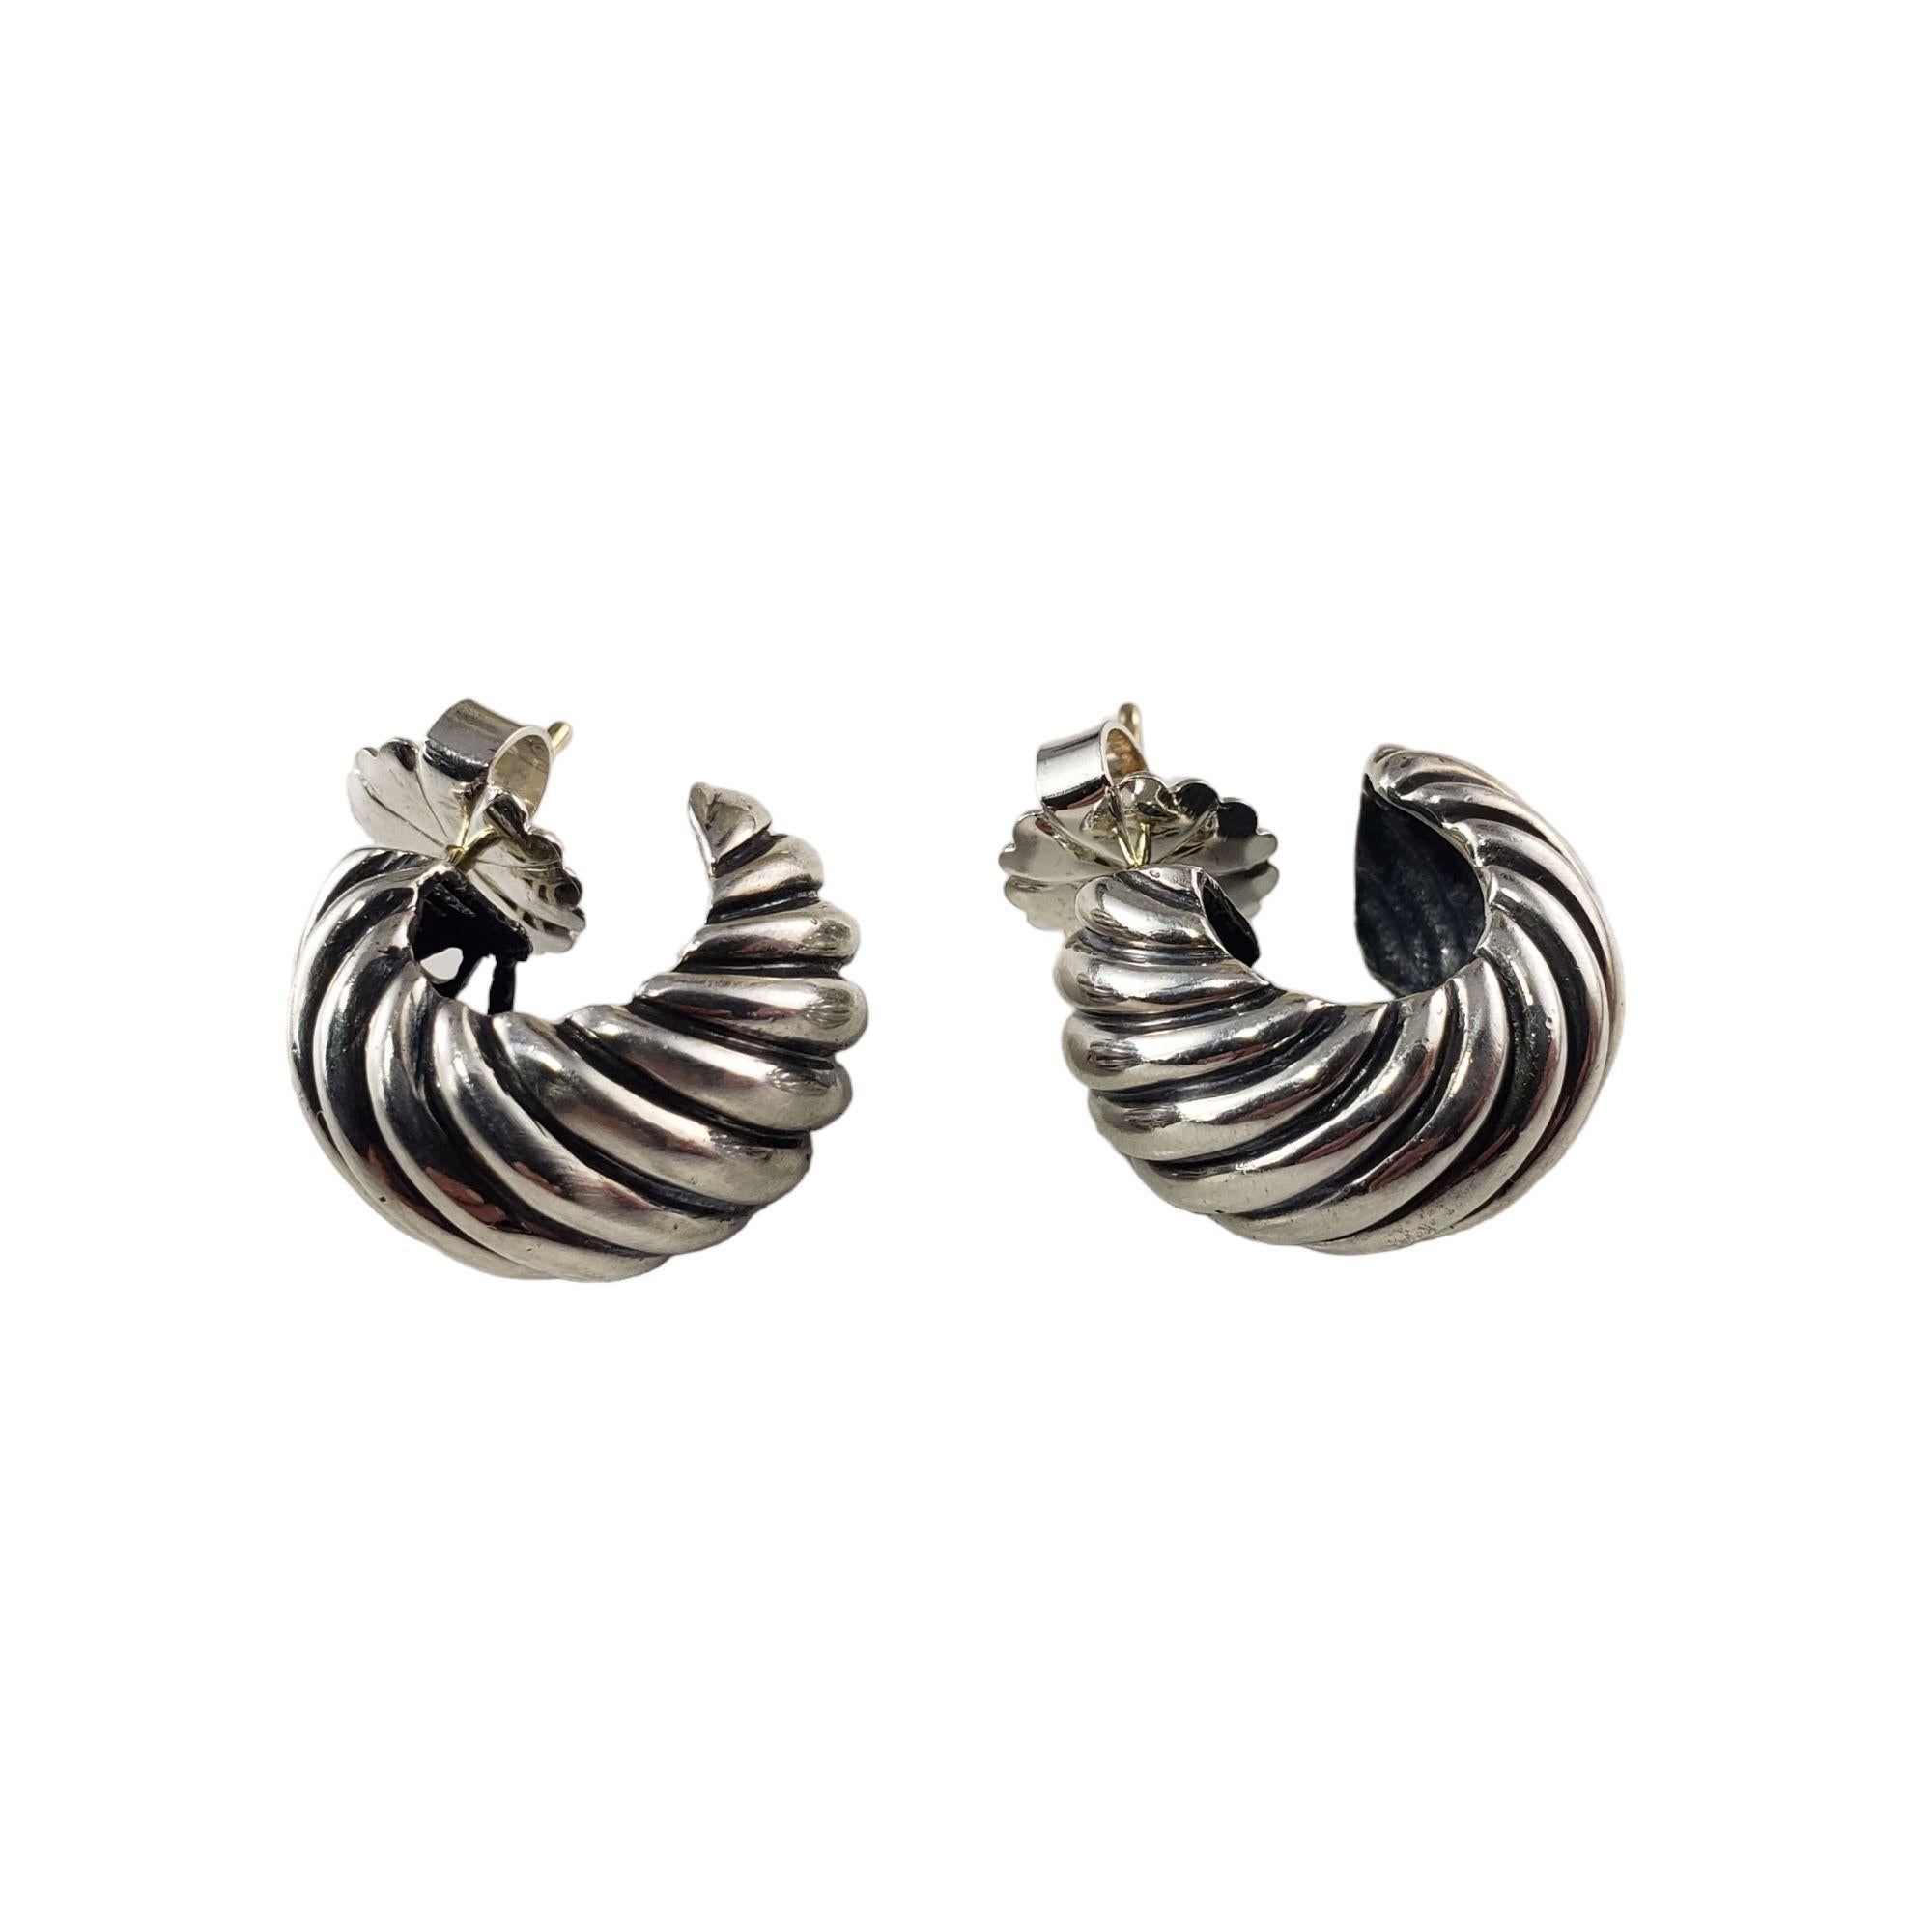 David Yurman Sterling Silver Cable Earrings-

These elegant cable earrings by David Yurman are crafted in beautifully detailed sterling silver. Width: 11 mm.

Size: 18 mm

Weight: 6.4 dwt. / 10.1 gr.

Hallmark: D.Y. 925

Very good condition,